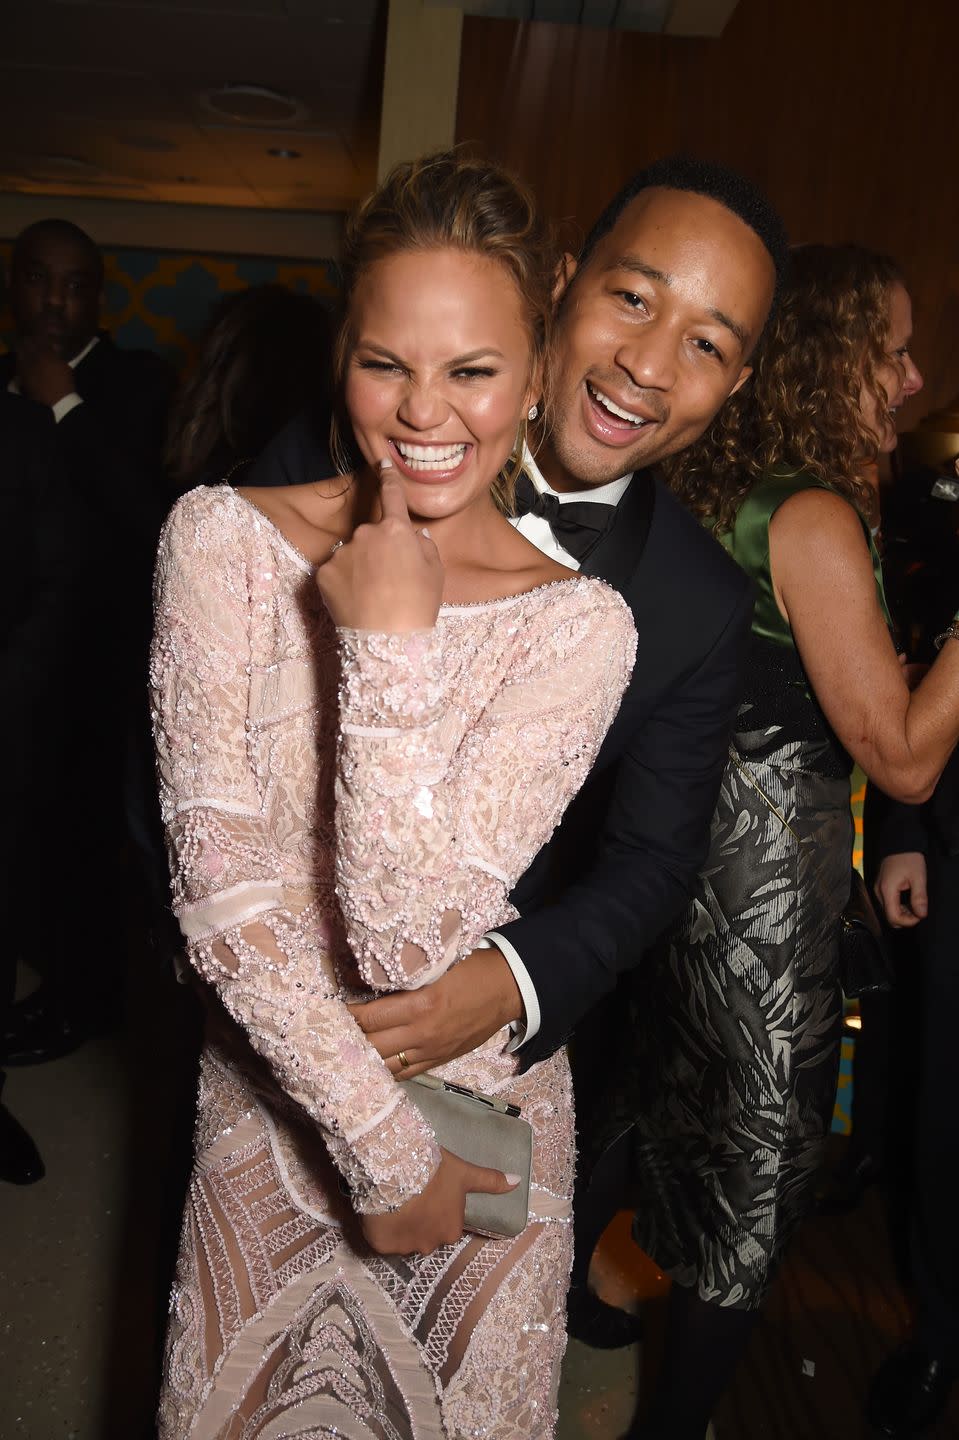 <p>Fan favourite couple, Teigen and Legend, met in 2007 on the set of his music video and married in 2013. They now have a daughter called Luna and a son called Miles.</p>